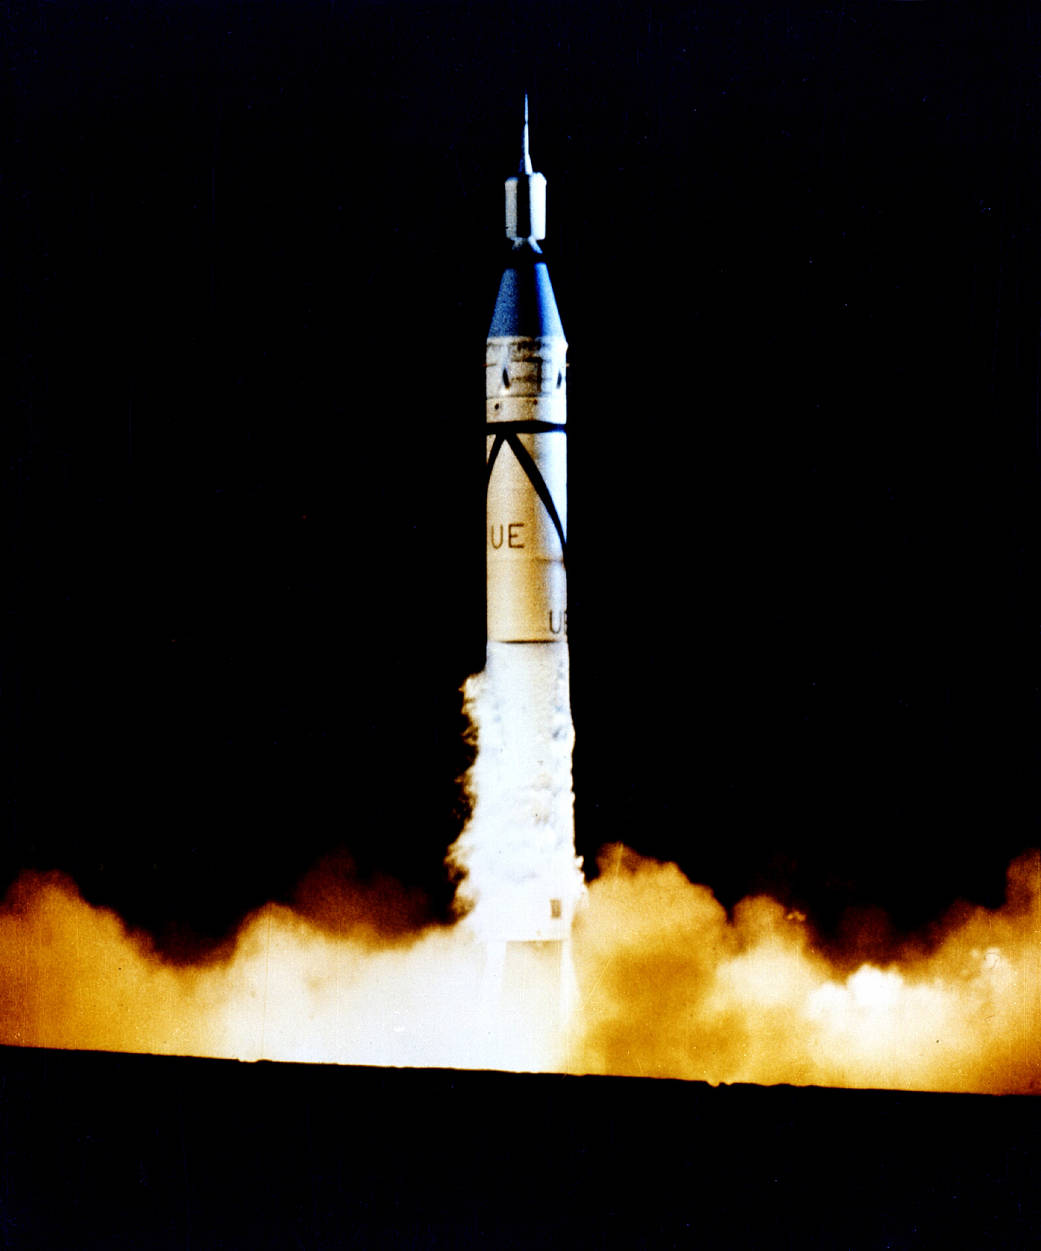 This photo shows the launch of Explorer 1 from Cape Canaveral, Fla., on Jan. 31, 1958. Explorer 1 is the small section on top of the large Jupiter-C rocket that blasted it into orbit.